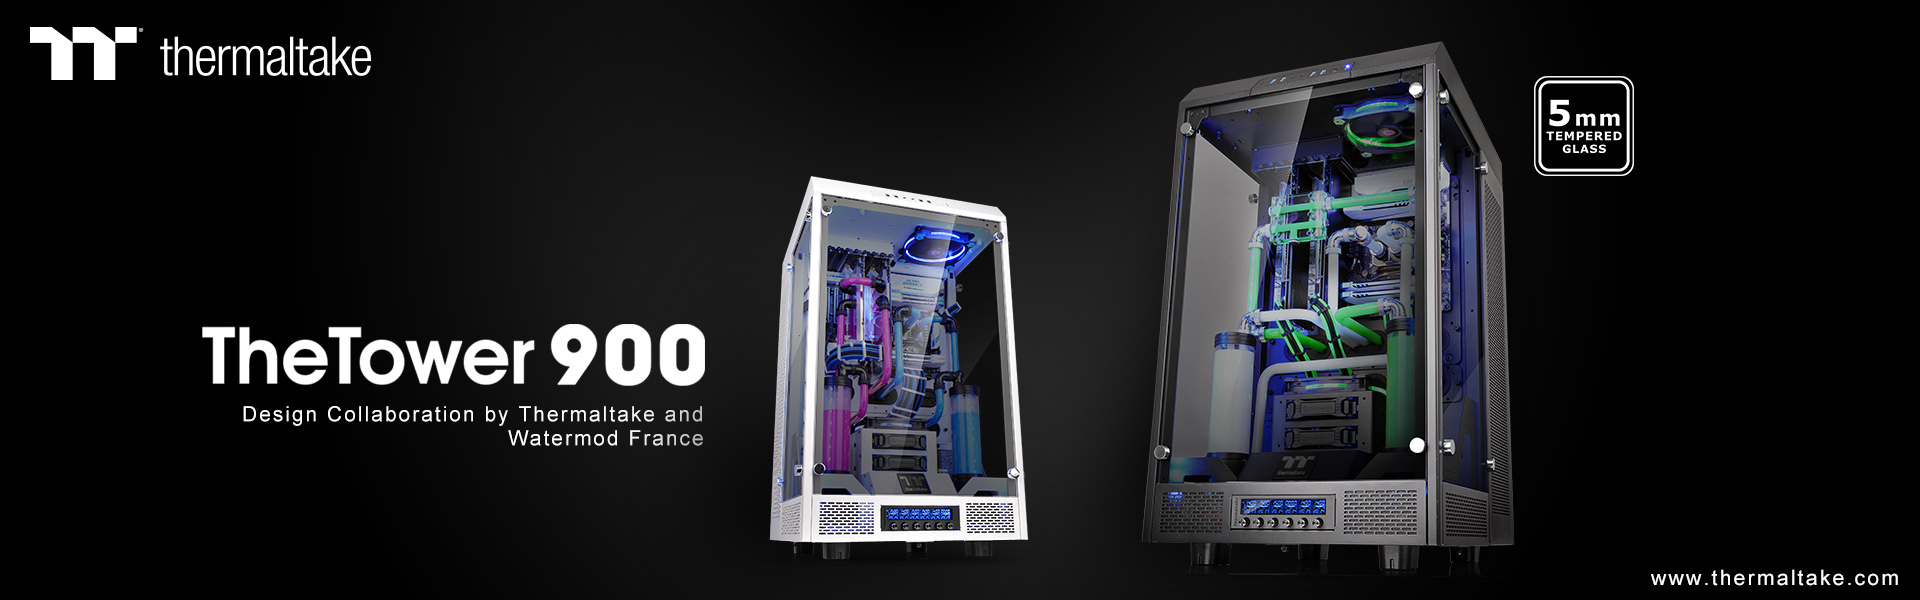 thermaltake-new-the-tower-900-e-atx-vertical-super-tower-chassis-series